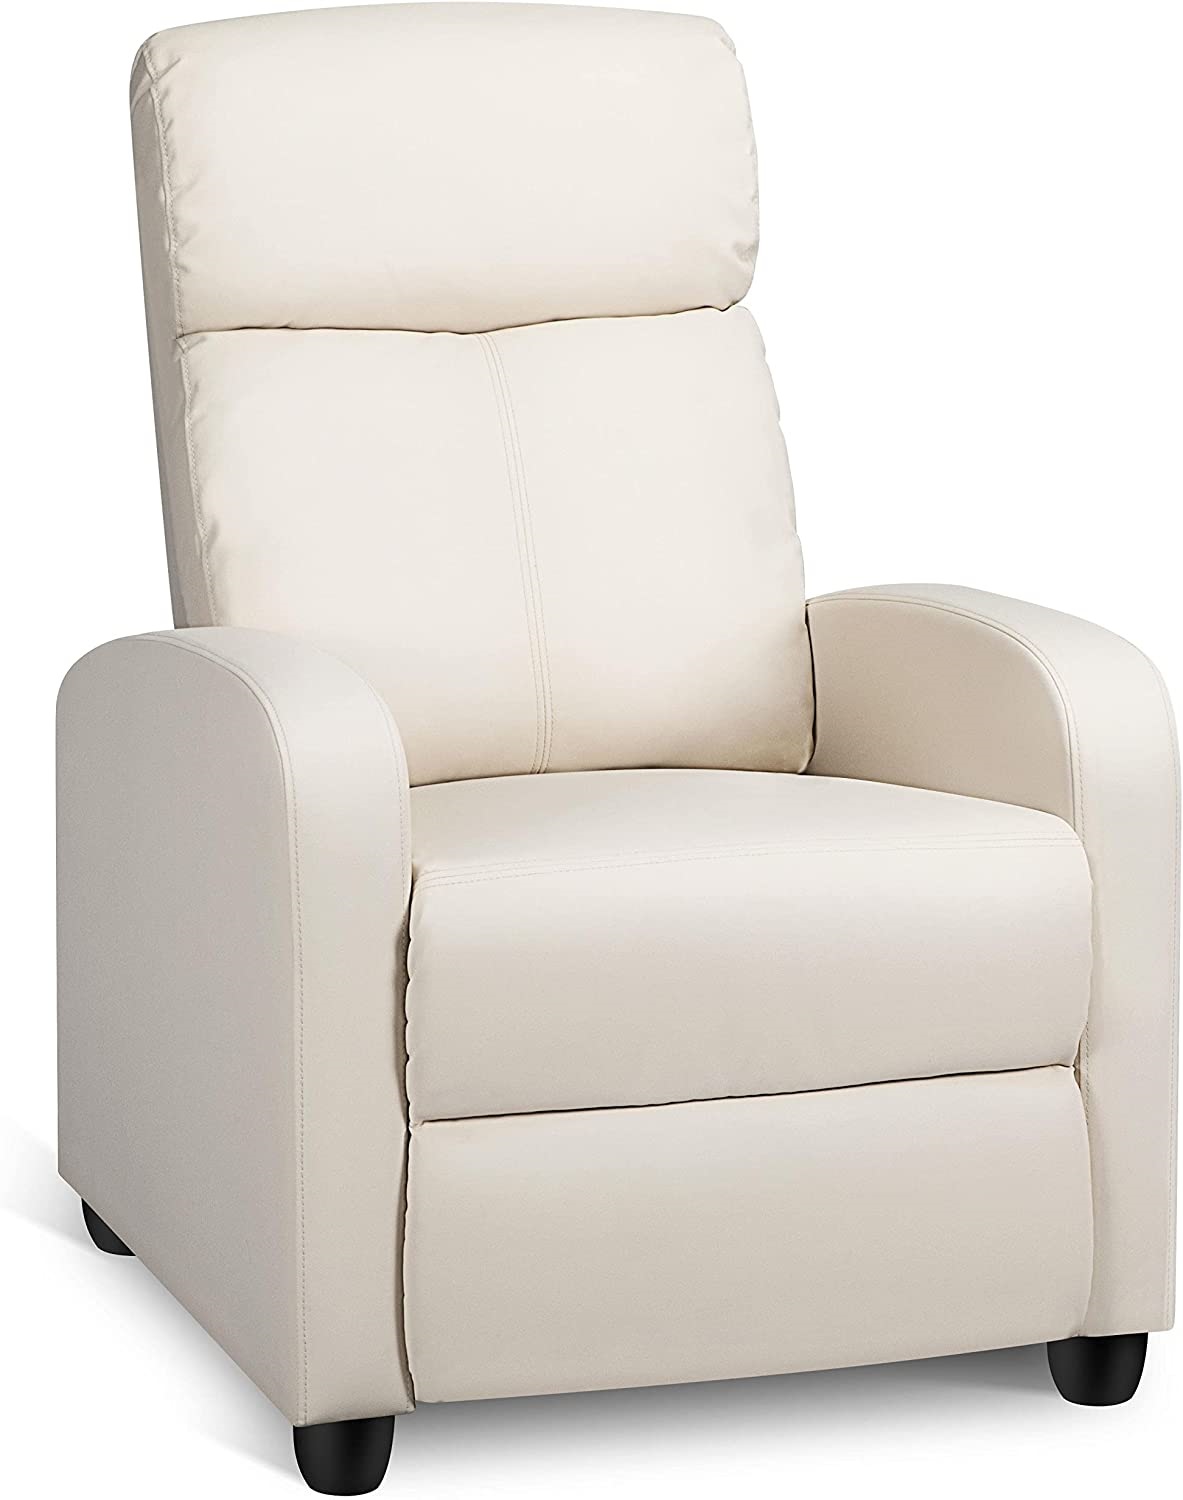 Best Recliner for Small Spaces